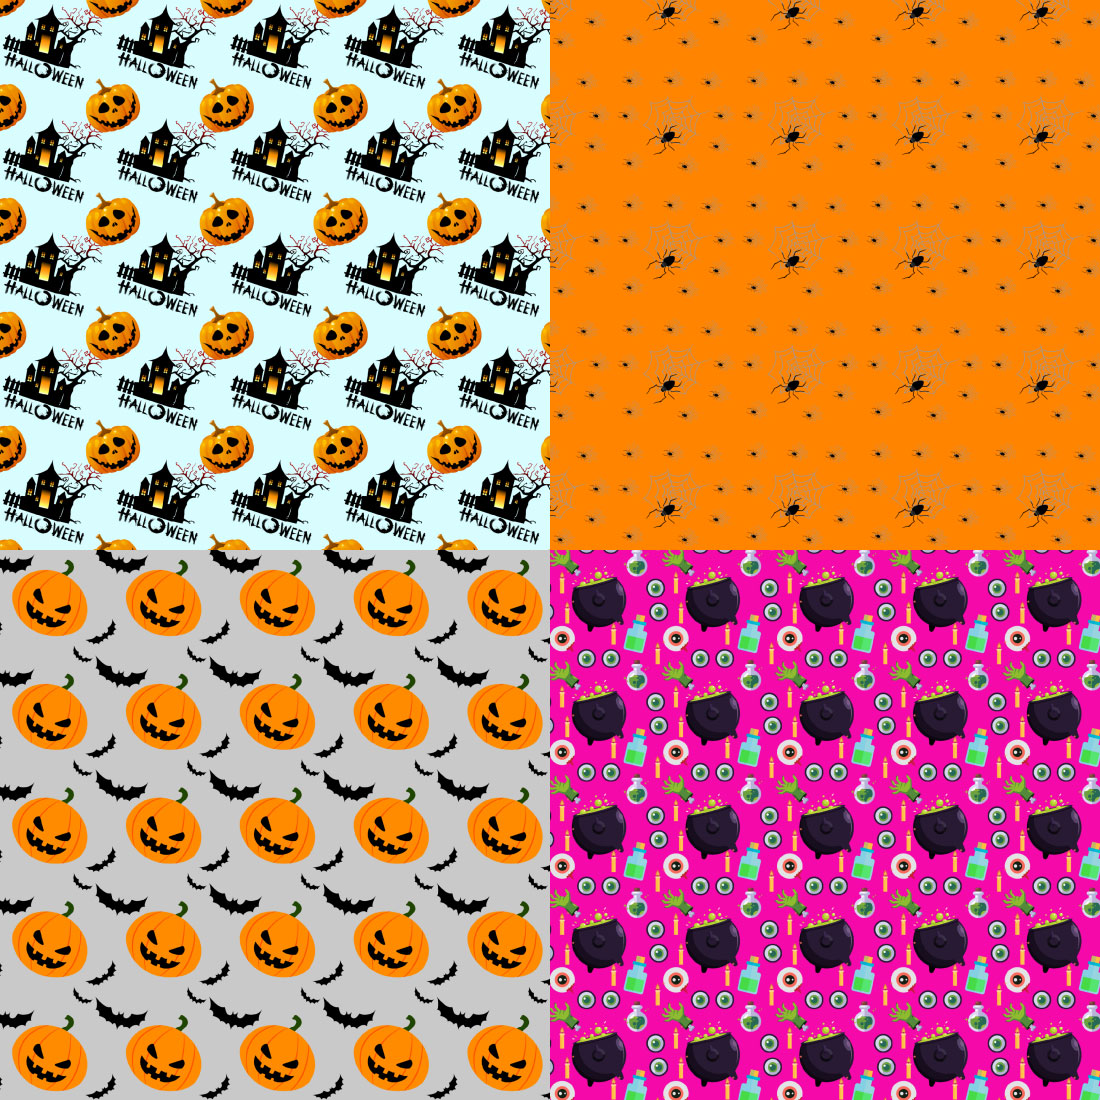 45pcs High Quality Haloween Digital Paper and Digital backgrounds in Image Format- only in $4 preview image.